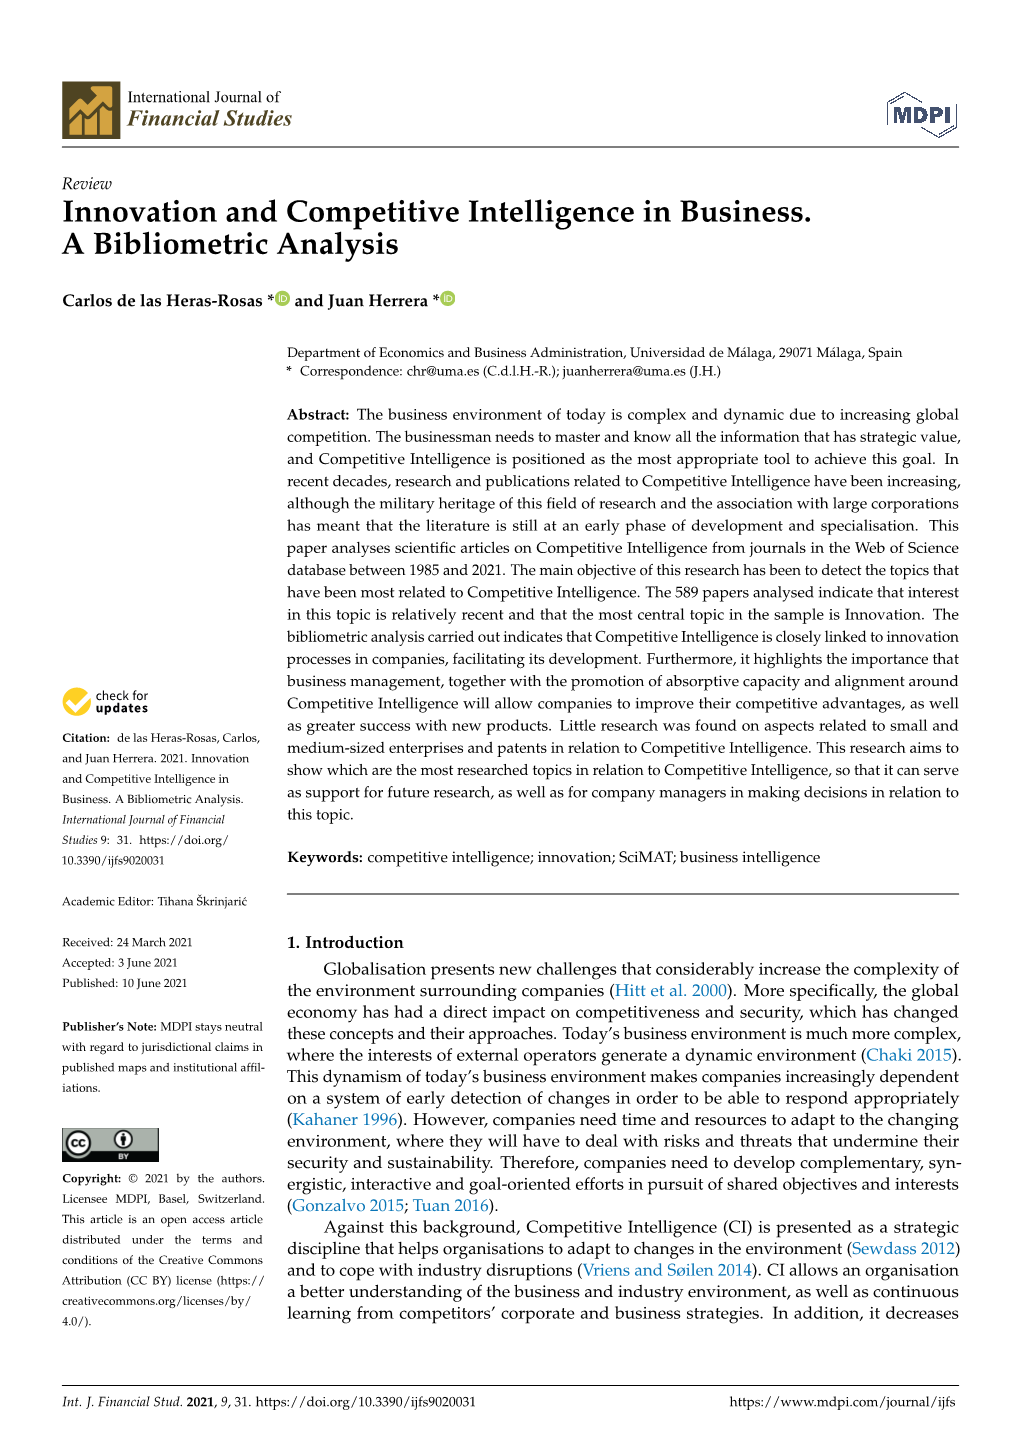 Innovation and Competitive Intelligence in Business. a Bibliometric Analysis